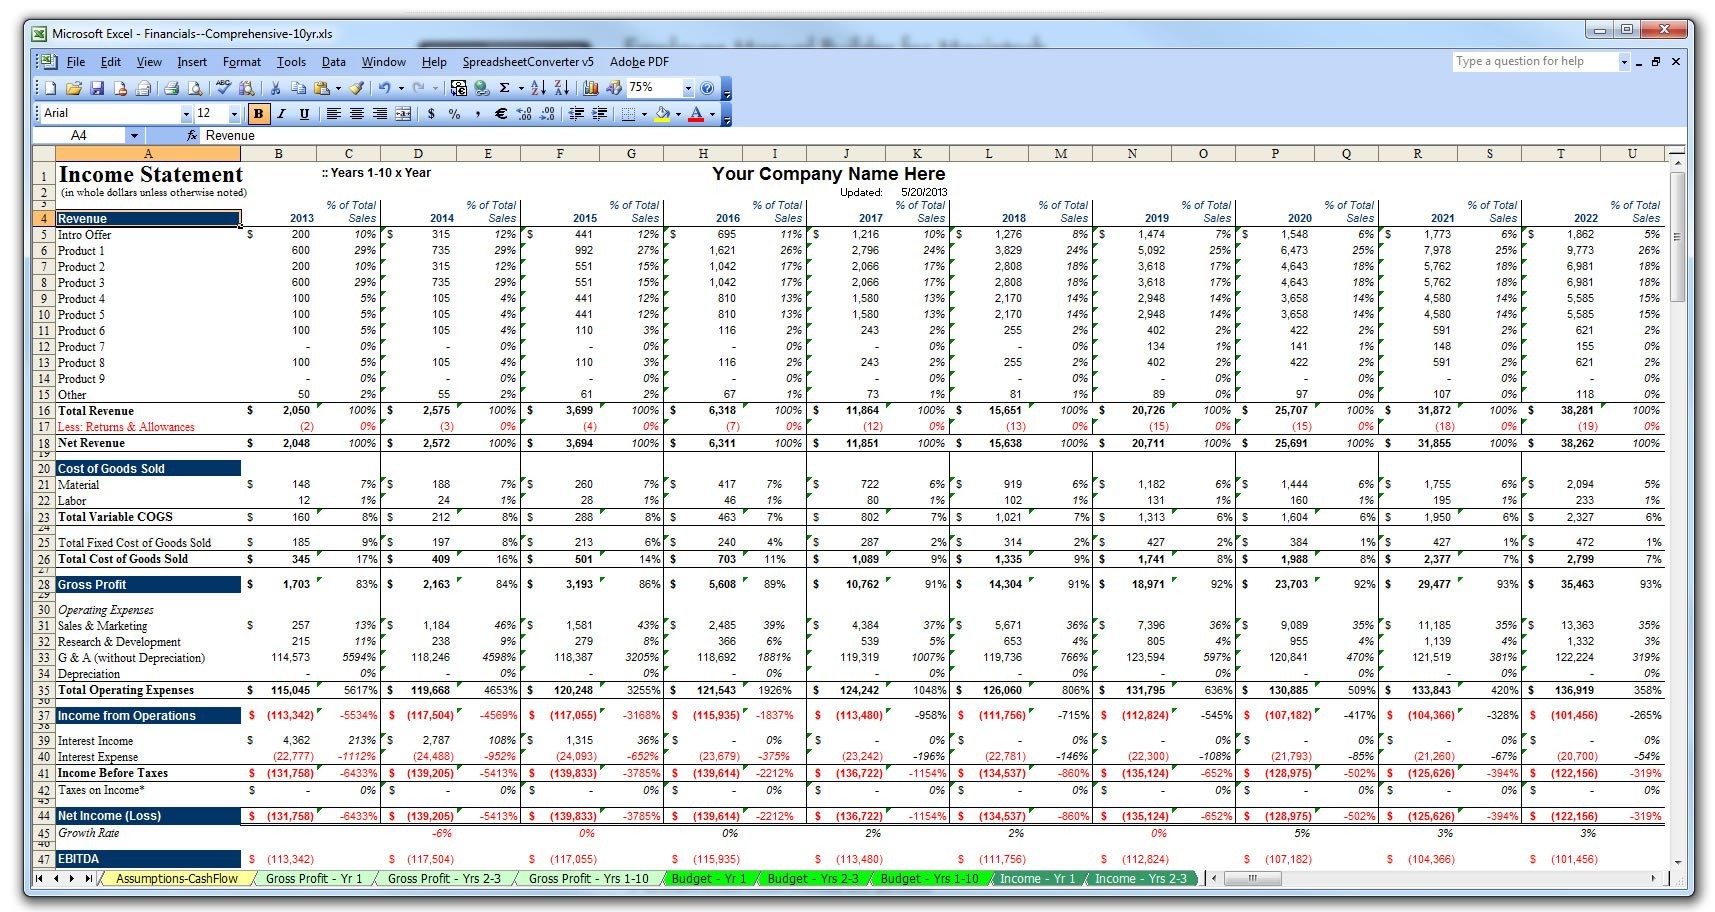 10 Year Business Plan Financial Budget Projection Model In Excel Document Template